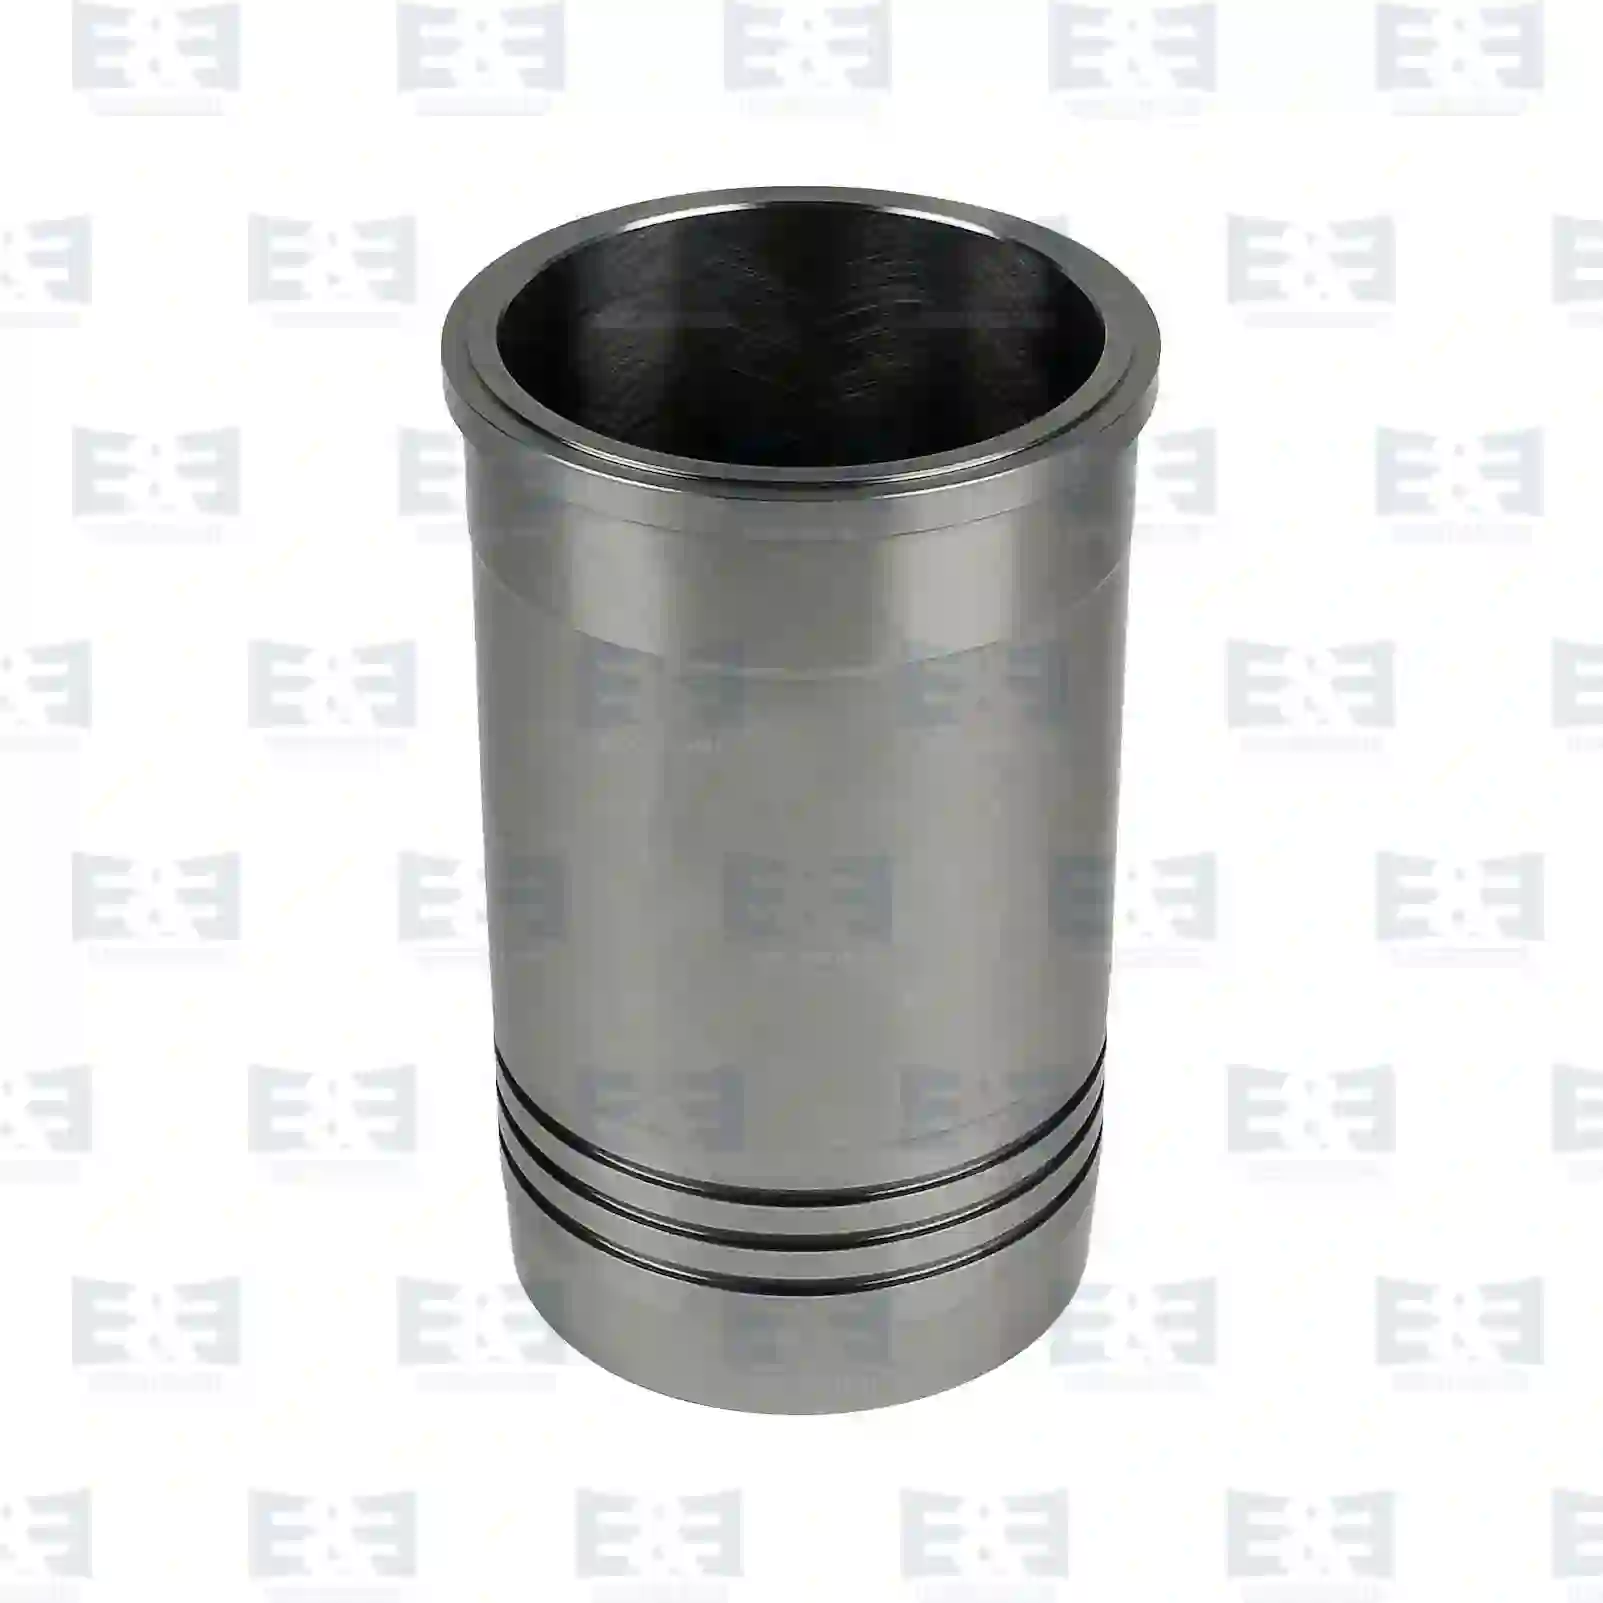 Cylinder liner, without seal rings, 2E2209922, SJ351533, 504074958, 500054922, 500337911, 504074959, 504094025 ||  2E2209922 E&E Truck Spare Parts | Truck Spare Parts, Auotomotive Spare Parts Cylinder liner, without seal rings, 2E2209922, SJ351533, 504074958, 500054922, 500337911, 504074959, 504094025 ||  2E2209922 E&E Truck Spare Parts | Truck Spare Parts, Auotomotive Spare Parts